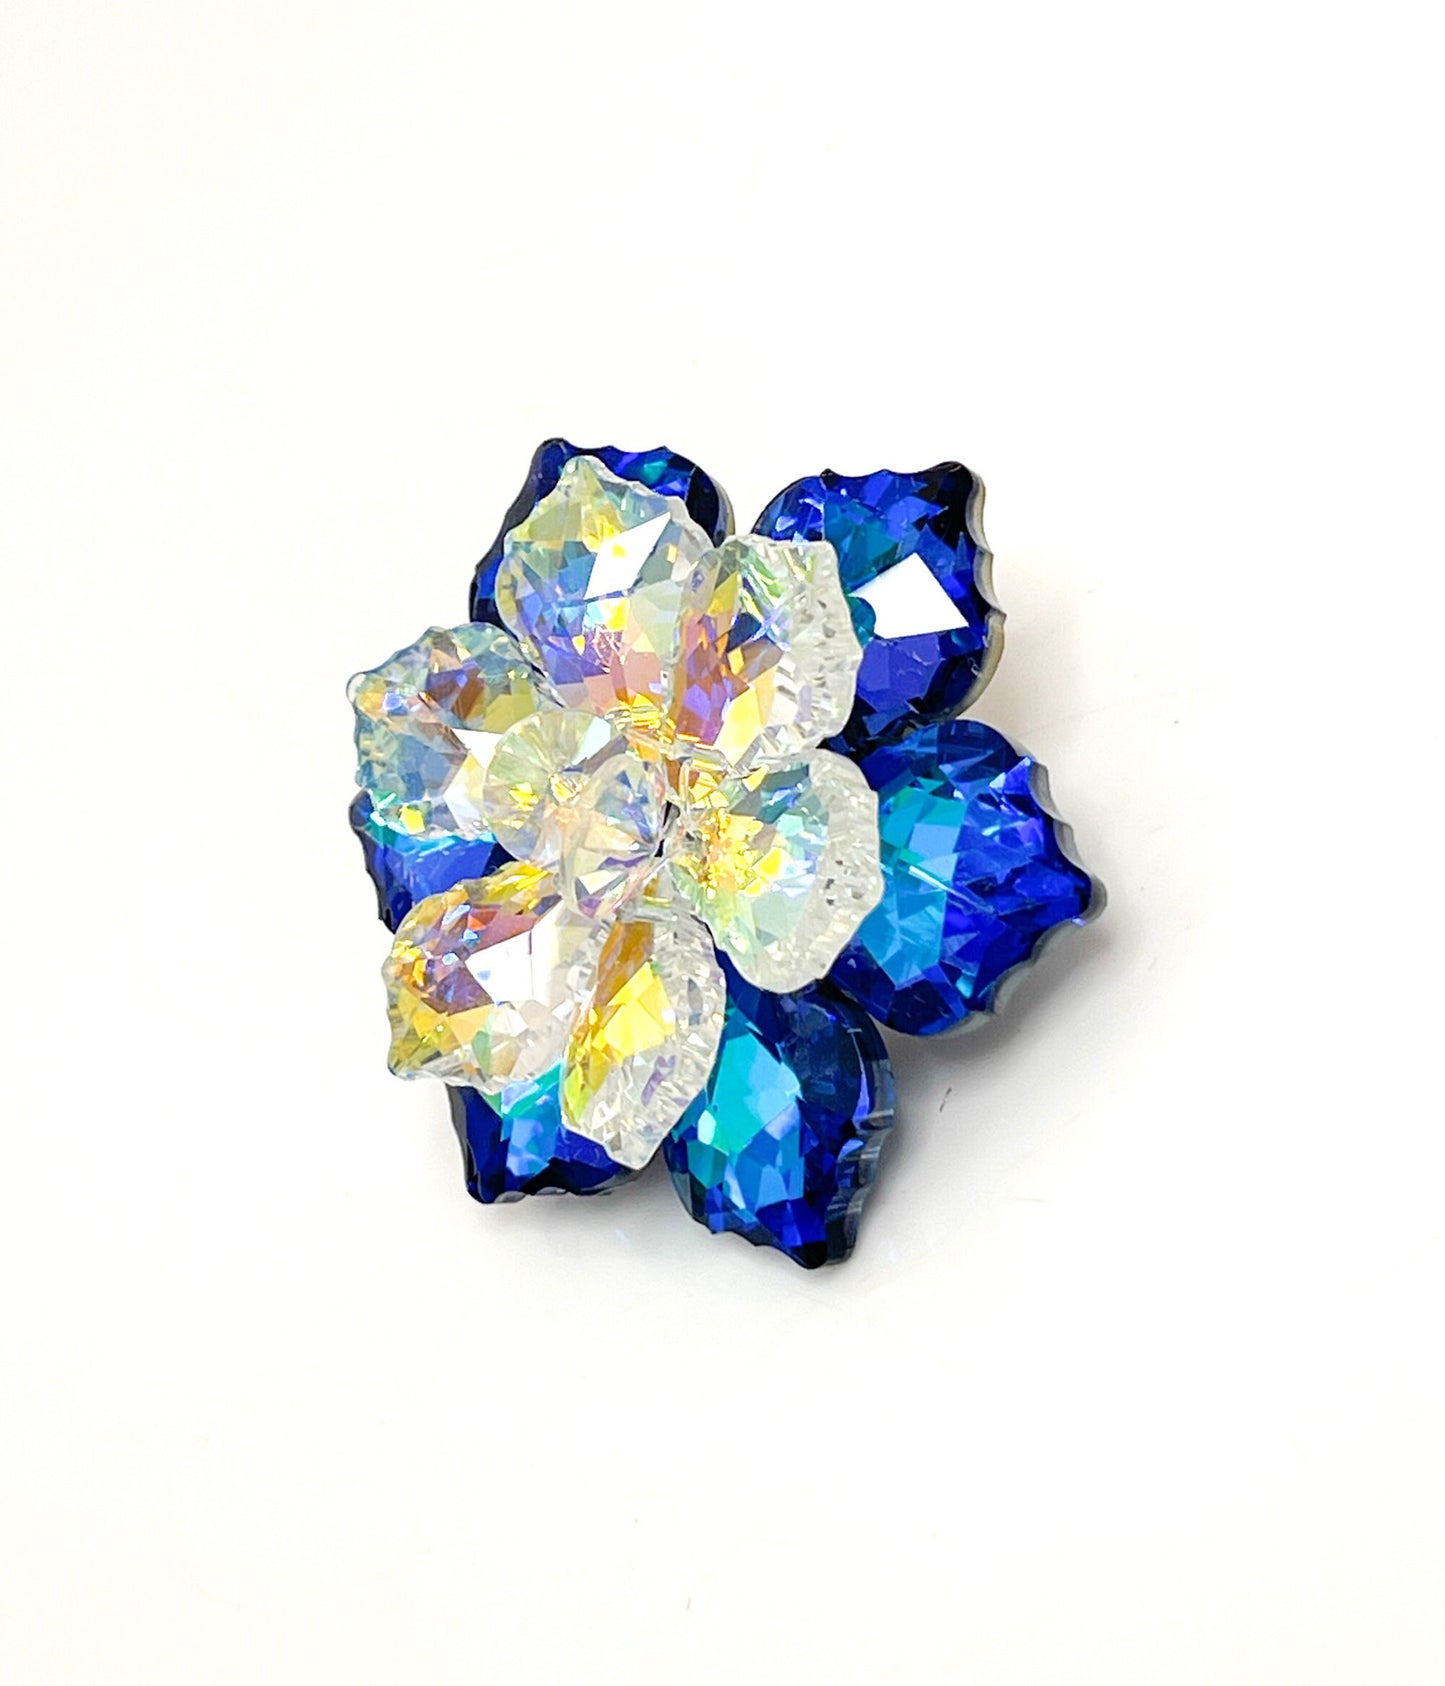 Sparkly Crystal Flower Brooch, Crystal Daisy Pin, Statement Brooch, Very Sparkly Jacket Pin, Brooches For Women